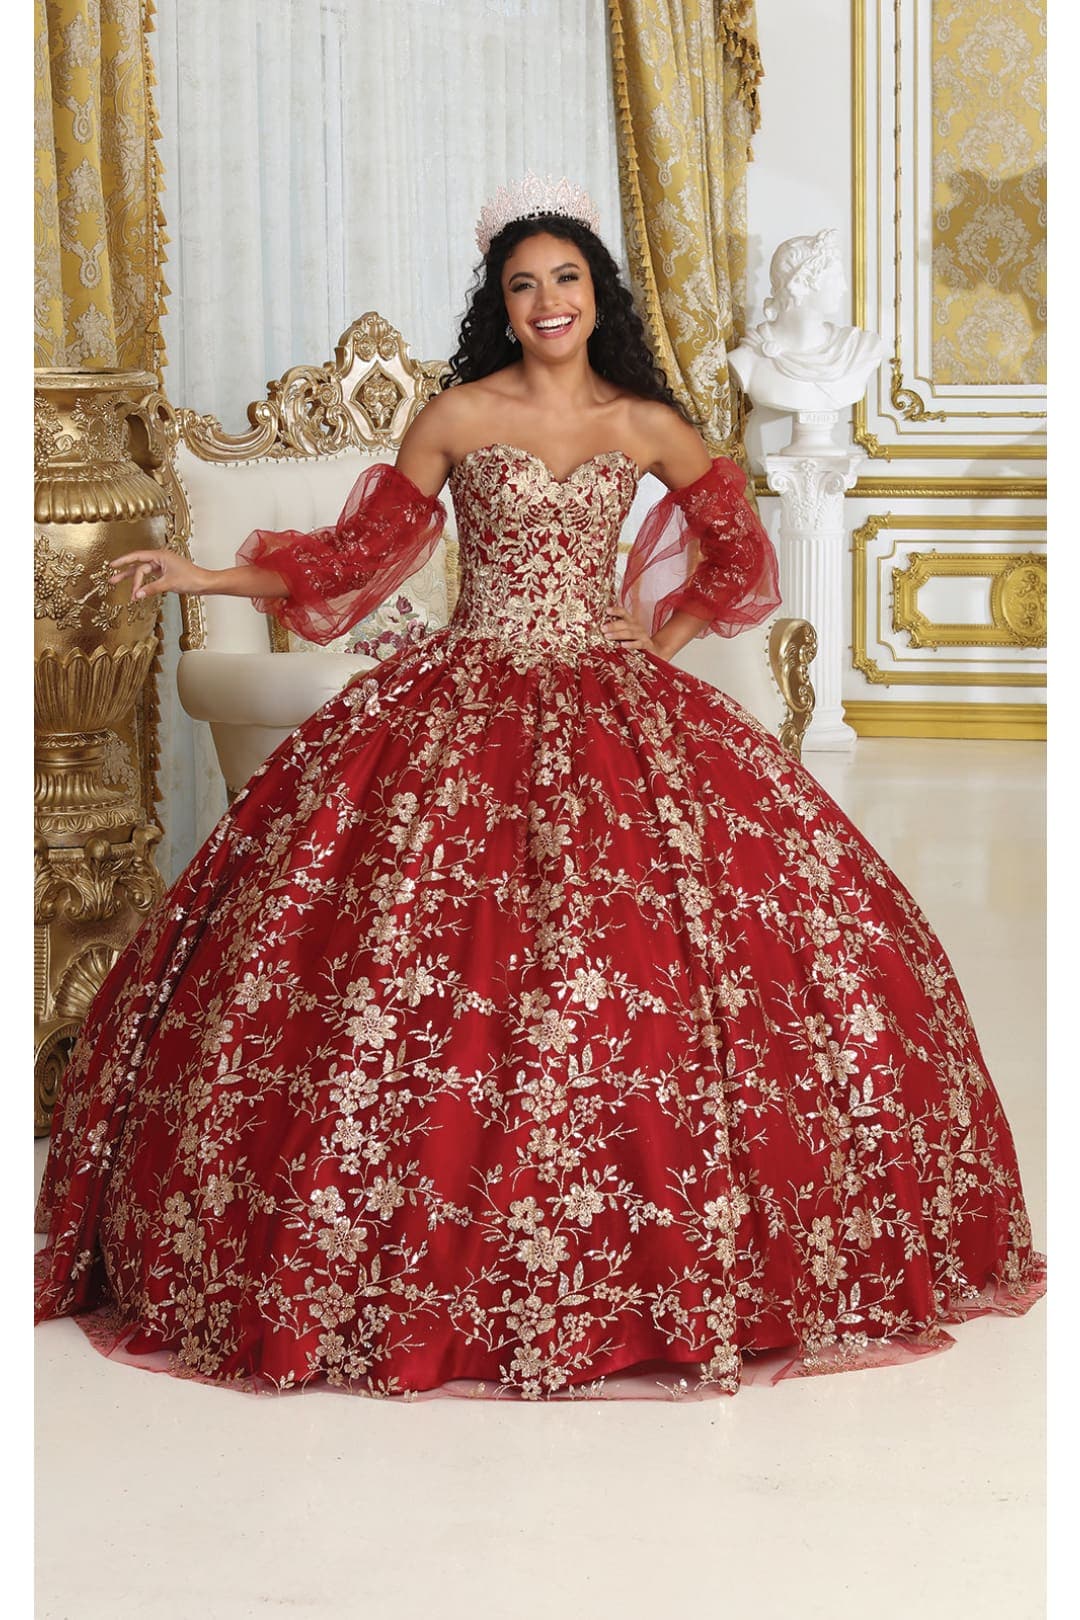 Layla K LK200 Detachable Puff Sleeves Sweetheart Glitter Quince Gown - BURGUNDY/GOLD / 4 - Dress